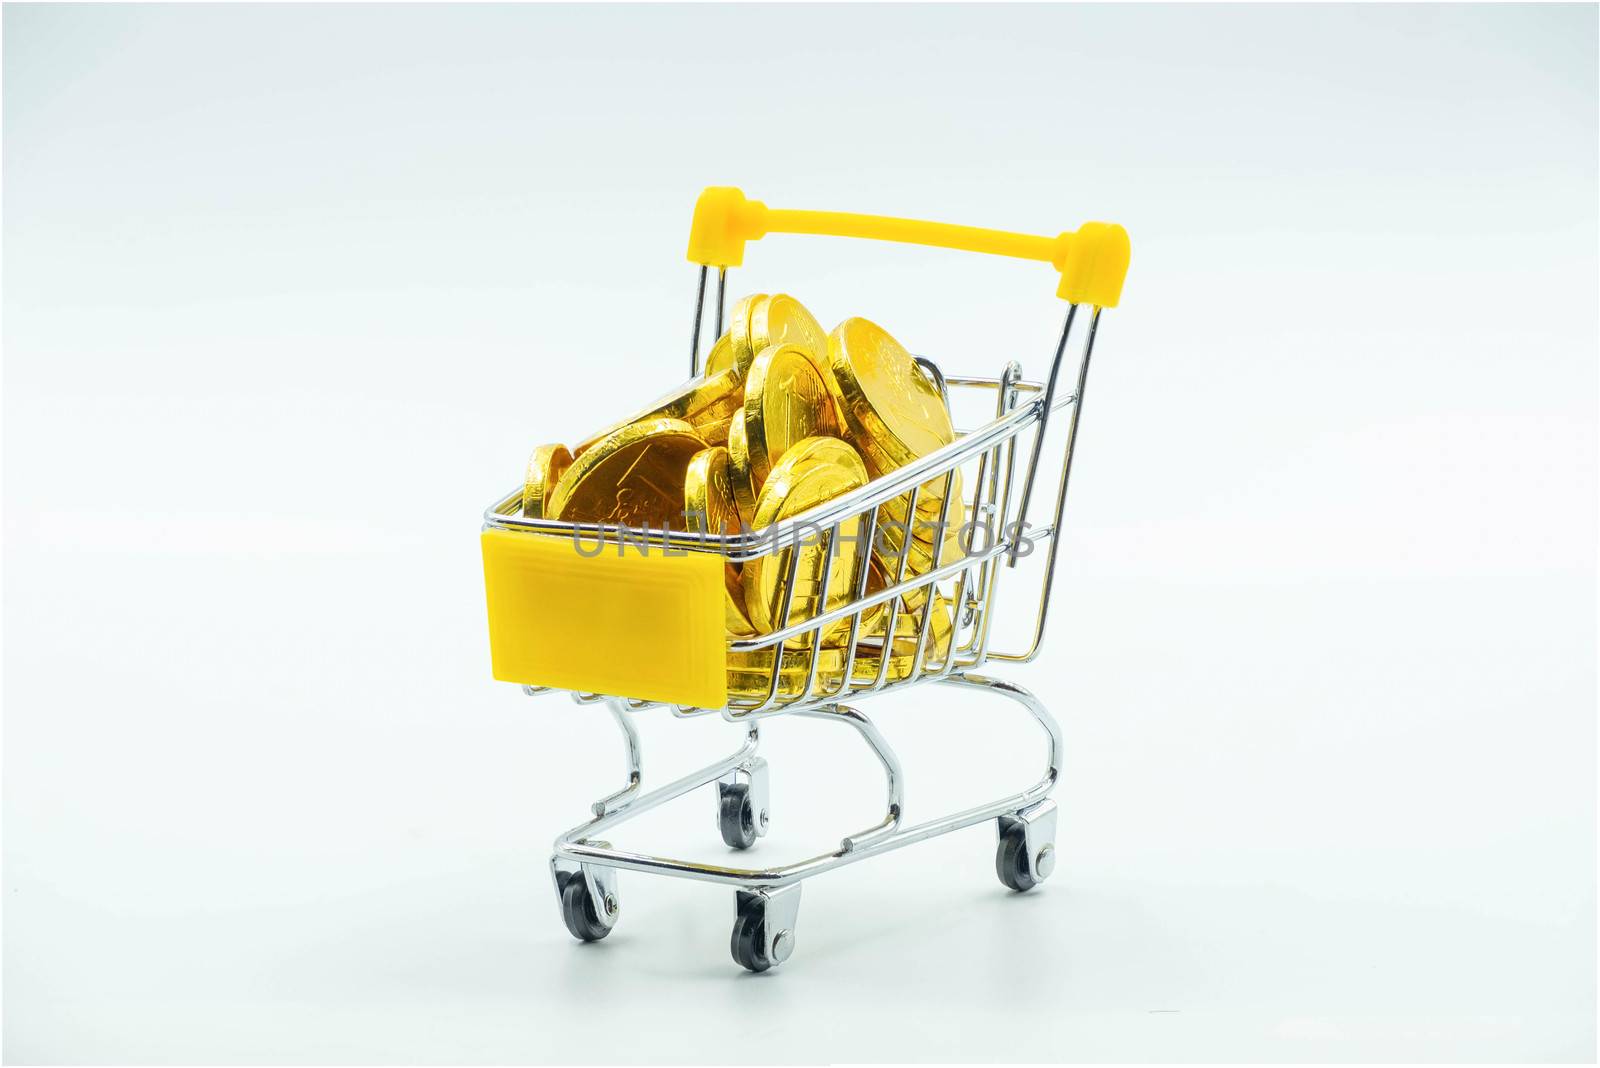 Shopping cart and Gold coins Isolated on White background by Bonn2210